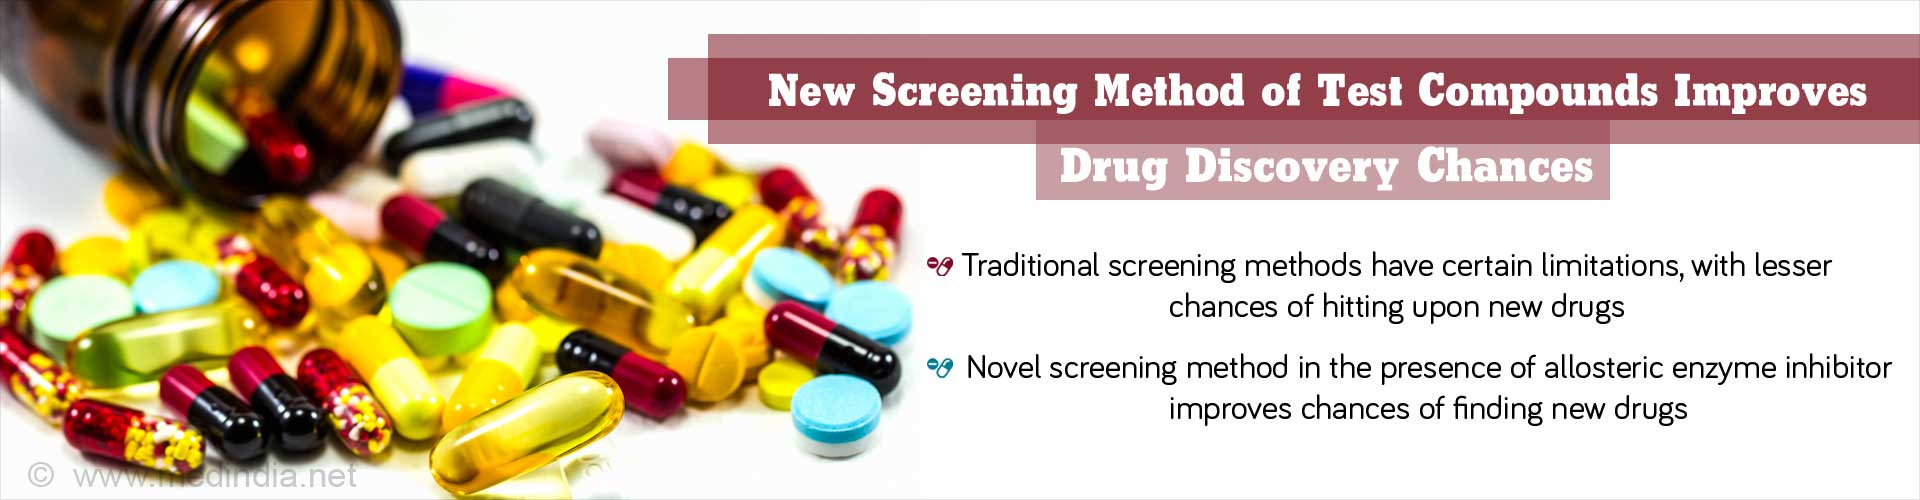 new screening method of test compounds improves drug discovery chances
- traditional screening methods have certain limitation, with lesser chances of hitting upon new drugs
- novel screening method in the presence of allosteric enzyme inhibitor improves chances of finding new drugs